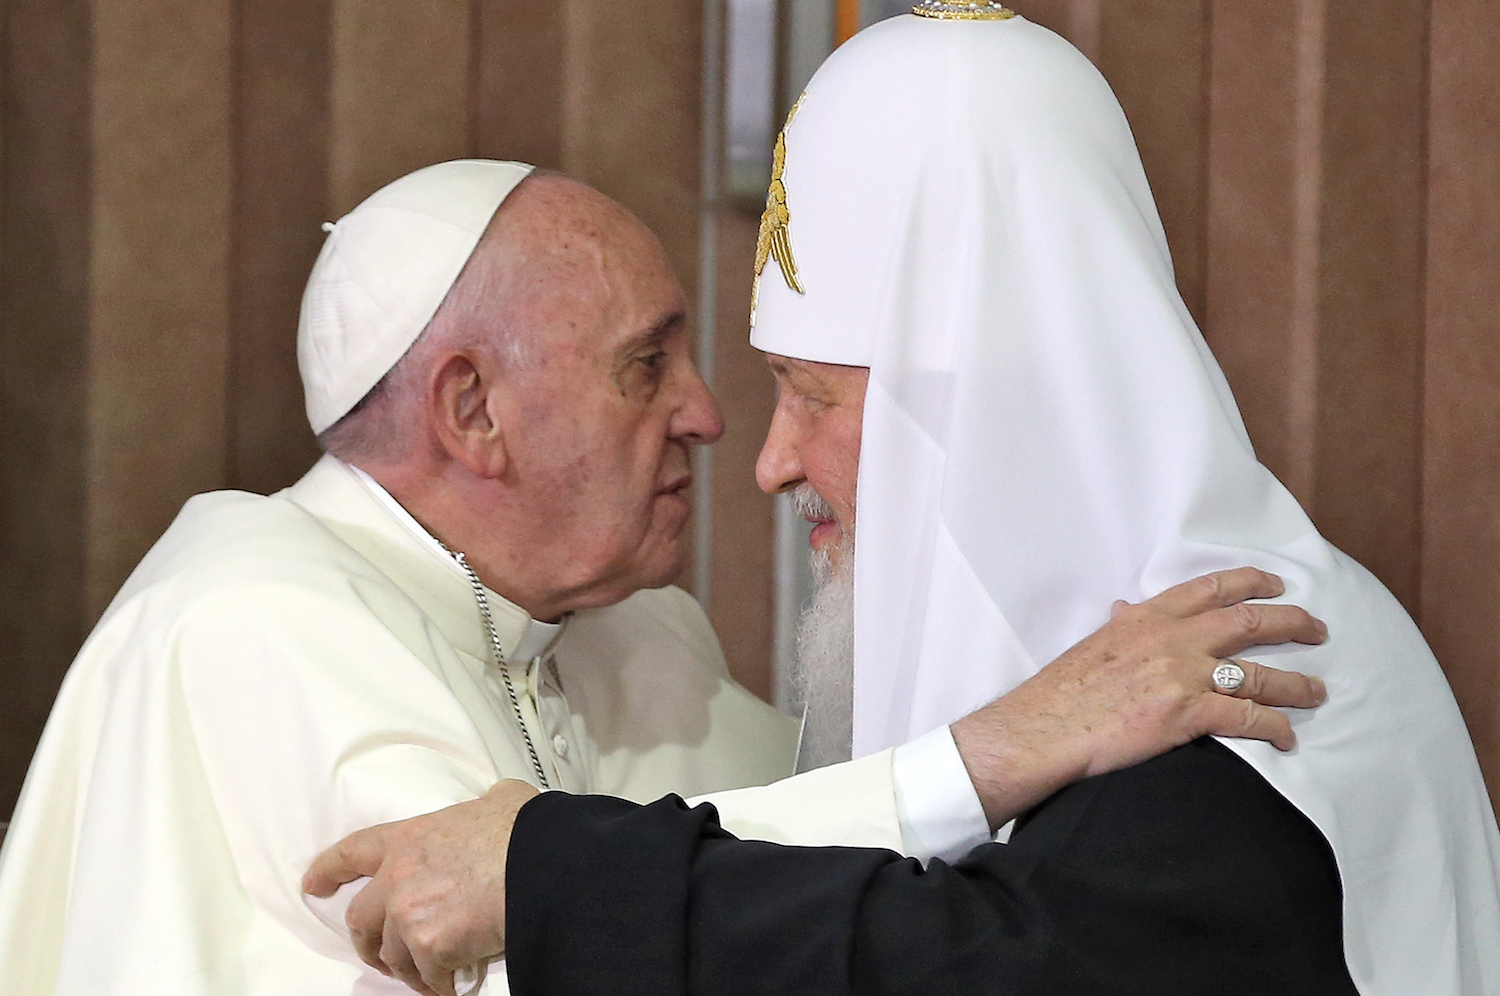 Pope Francis (L) and the head of the Russian Orthodox Church, Patriarch Kirill (R), approach to kiss during a historic meeting in Havana on February 12, 2016. Pope Francis and Russian Orthodox Patriarch Kirill kissed each other and sat down together Friday at Havana airport for the first meeting between their two branches of the church in nearly a thousand years. AFP PHOTO / POOL - Alejandro Ernesto / AFP / POOL / ALEJANDRO ERNESTO (Photo credit should read ALEJANDRO ERNESTO/AFP/Getty Images)